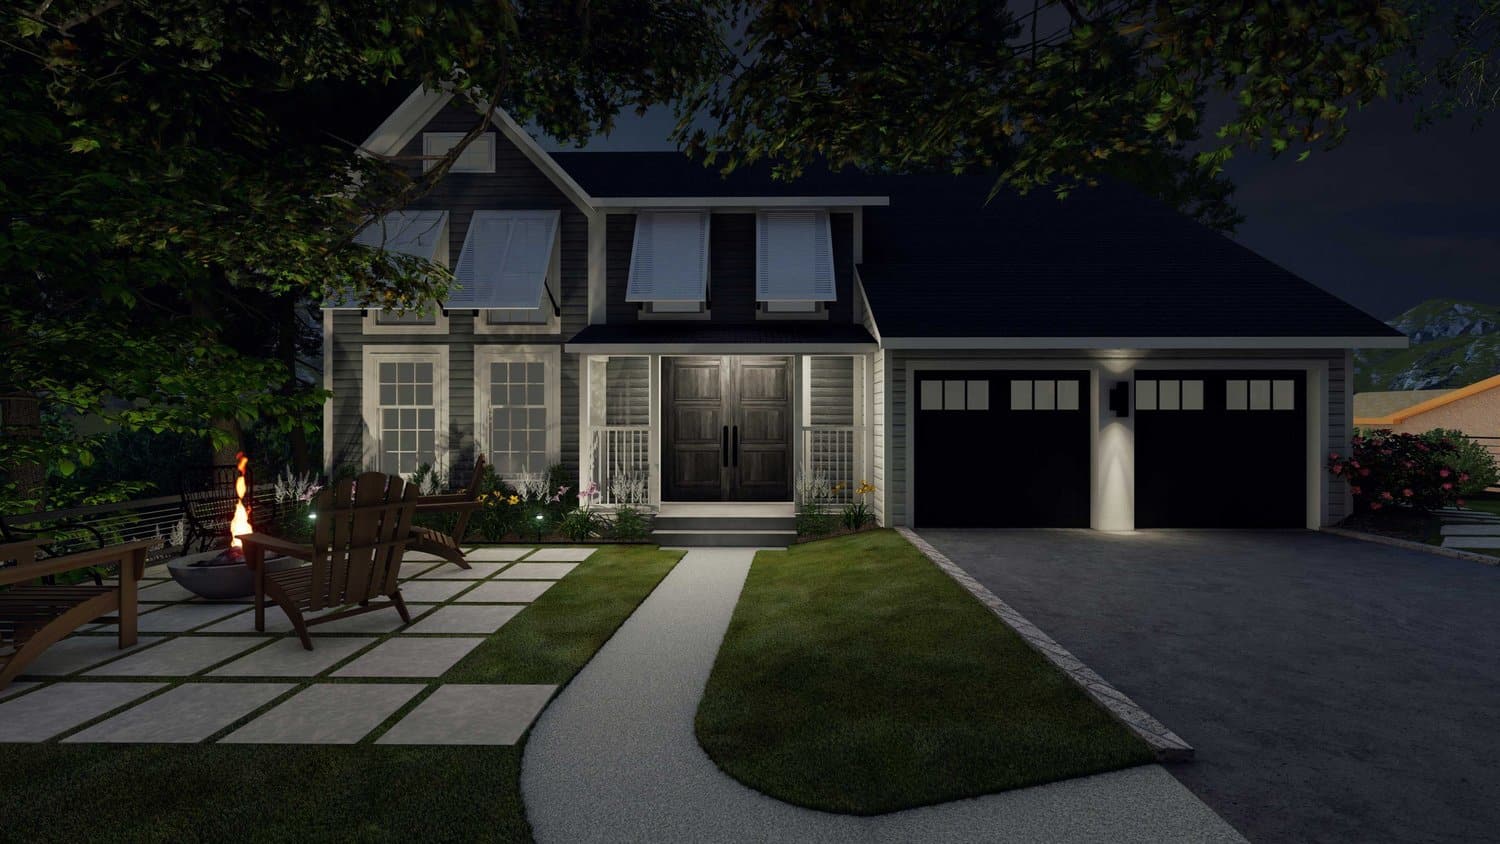 Ocean City front yard with paver patio fire pit seating area and concrete driveway